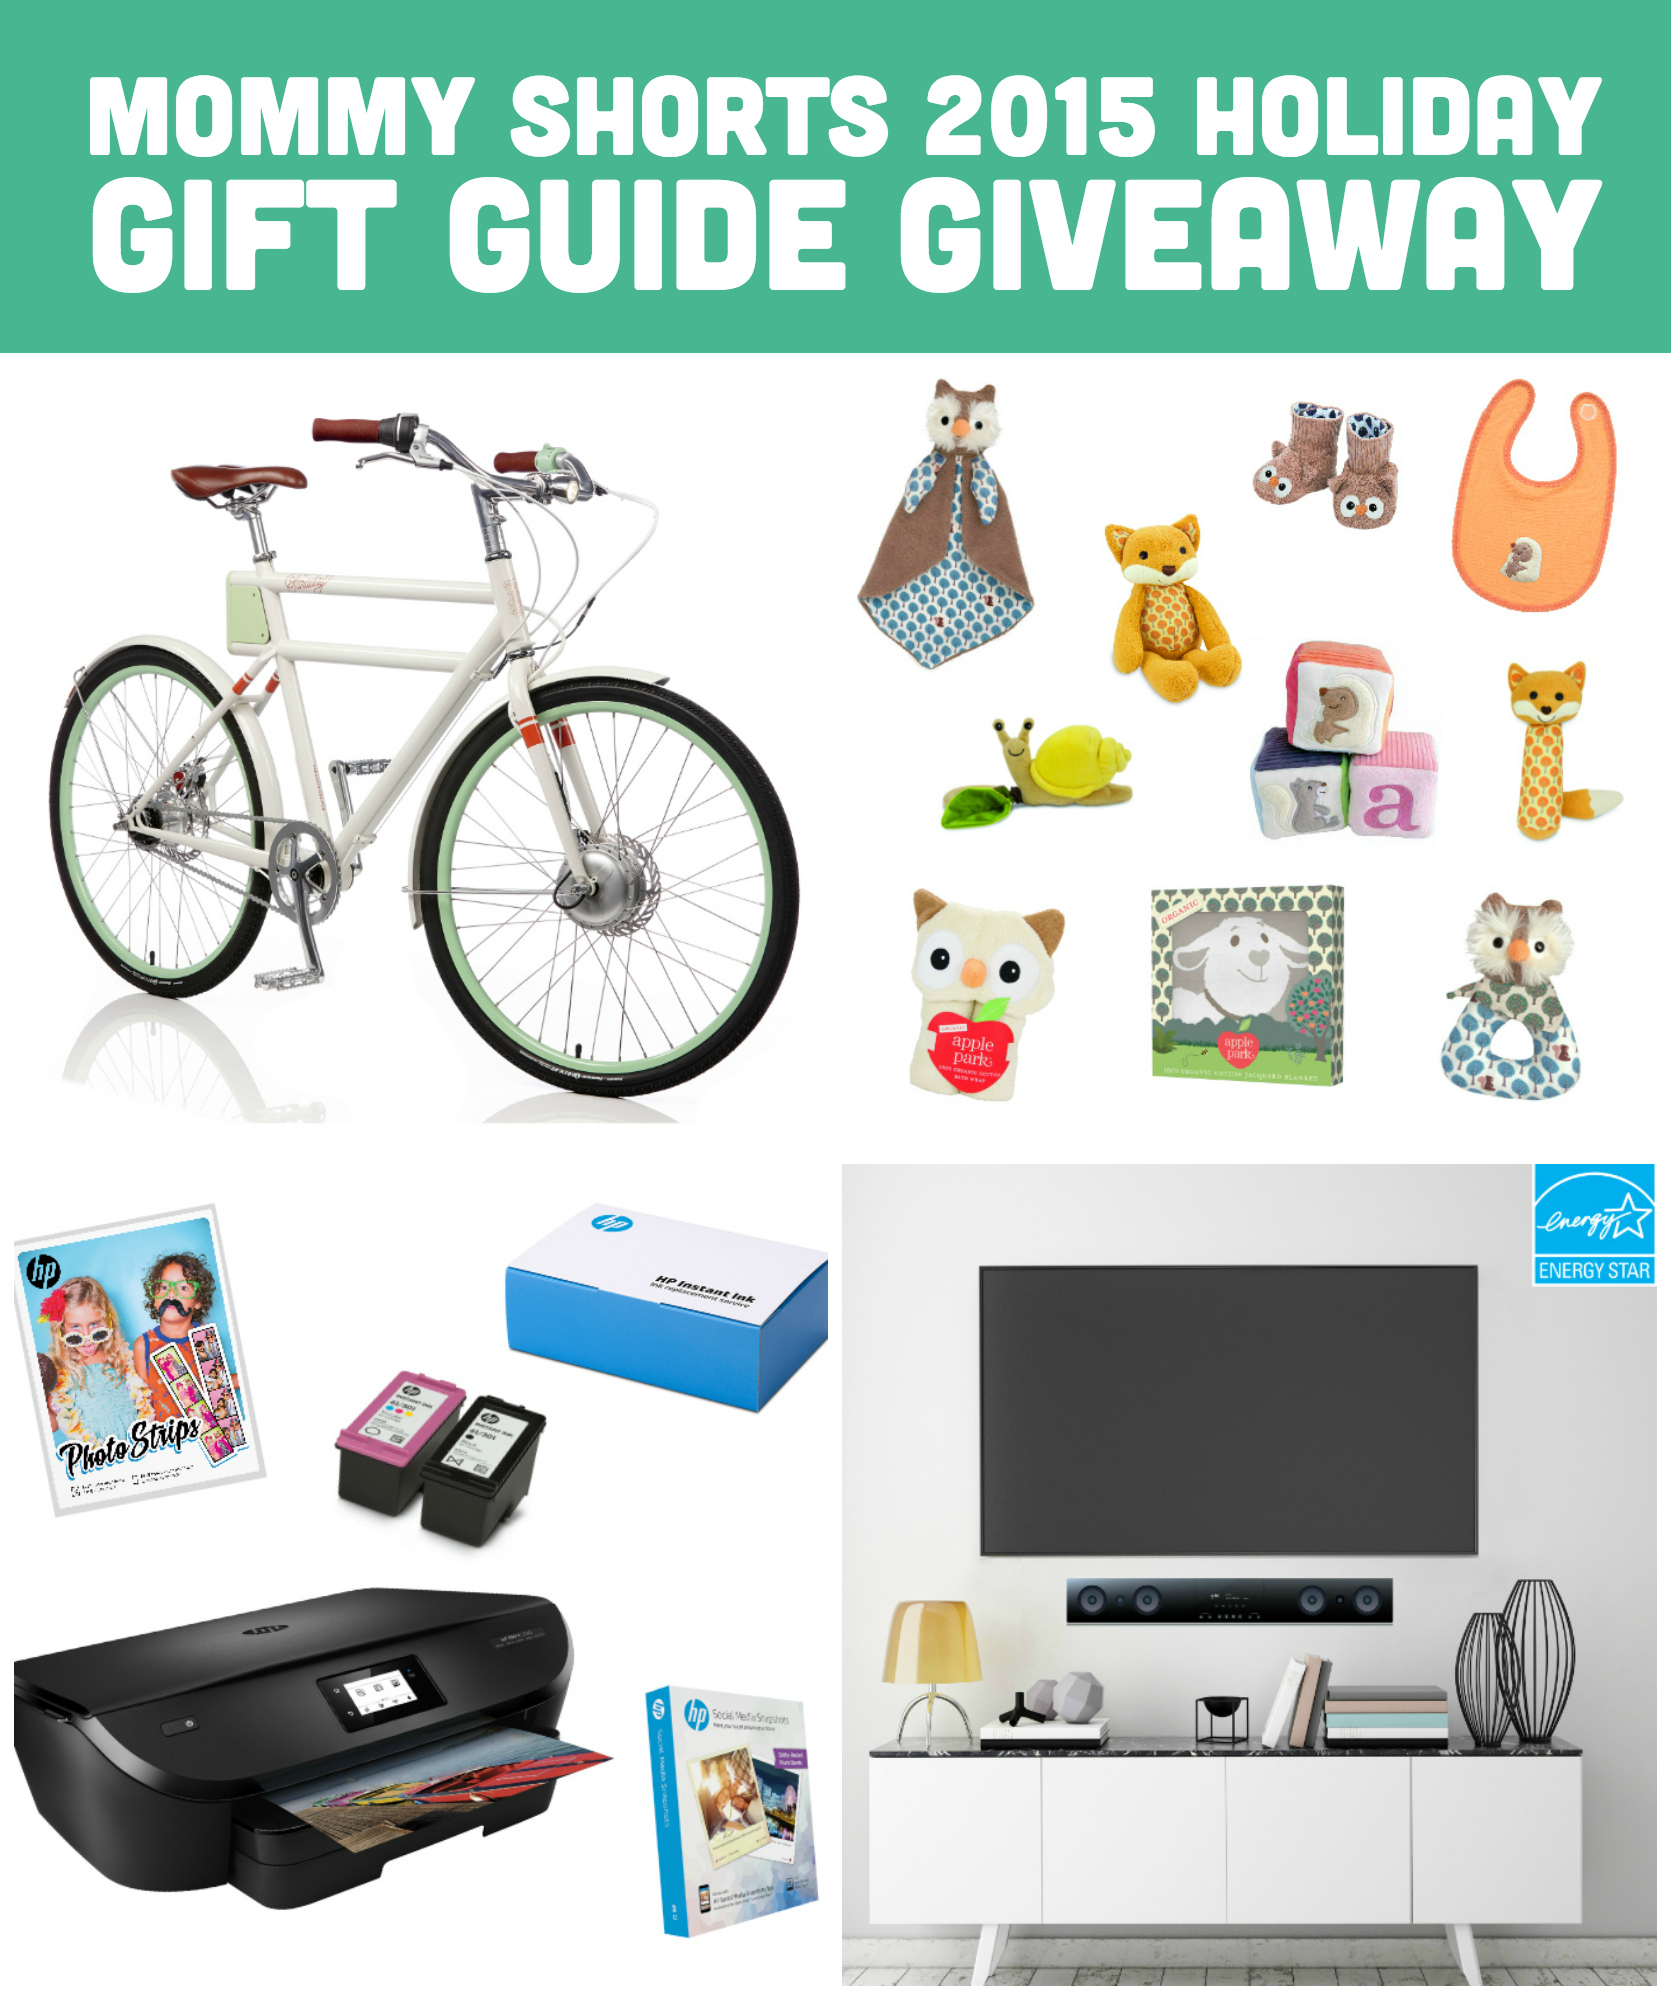 Looking for the perfect holiday gift? Here's your guide to hundreds of gift ideas for moms, dads, babies, kids, aunts, uncles, etc.!